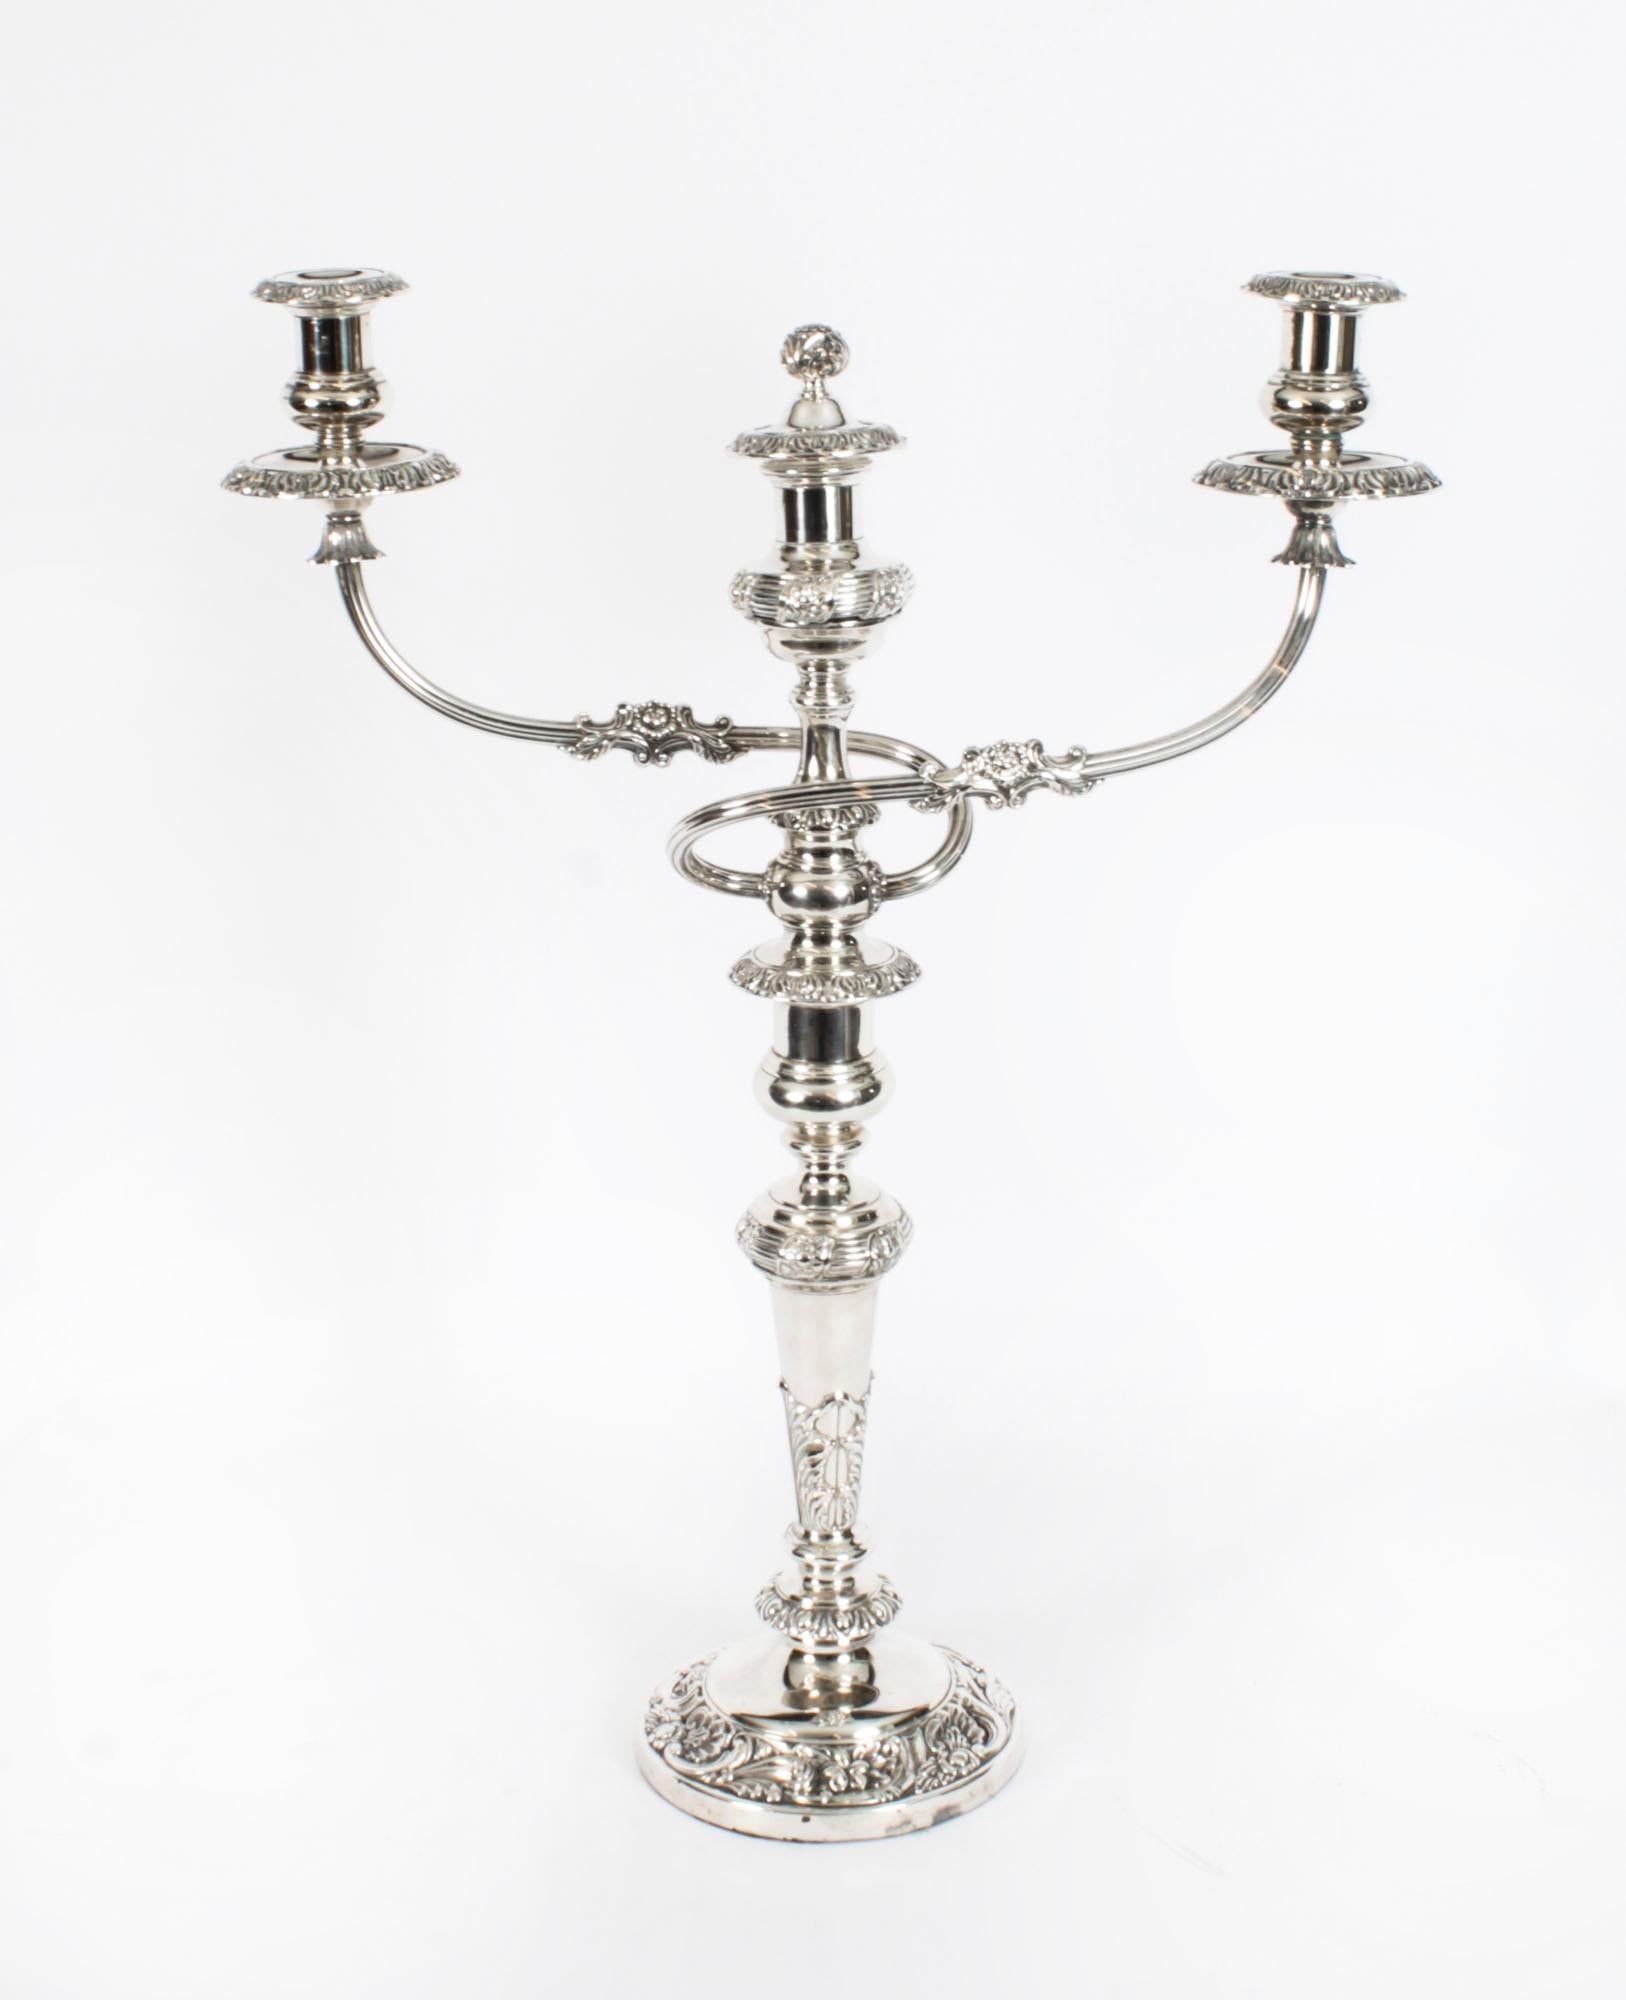 This is a stunning pair of large antique Regency Period Old Sheffield George III silver plated two branch three light table candelabra, circa 1820 in date.
 
The candelabra featurettwisted branches with detachable sconces and have beautiful cast